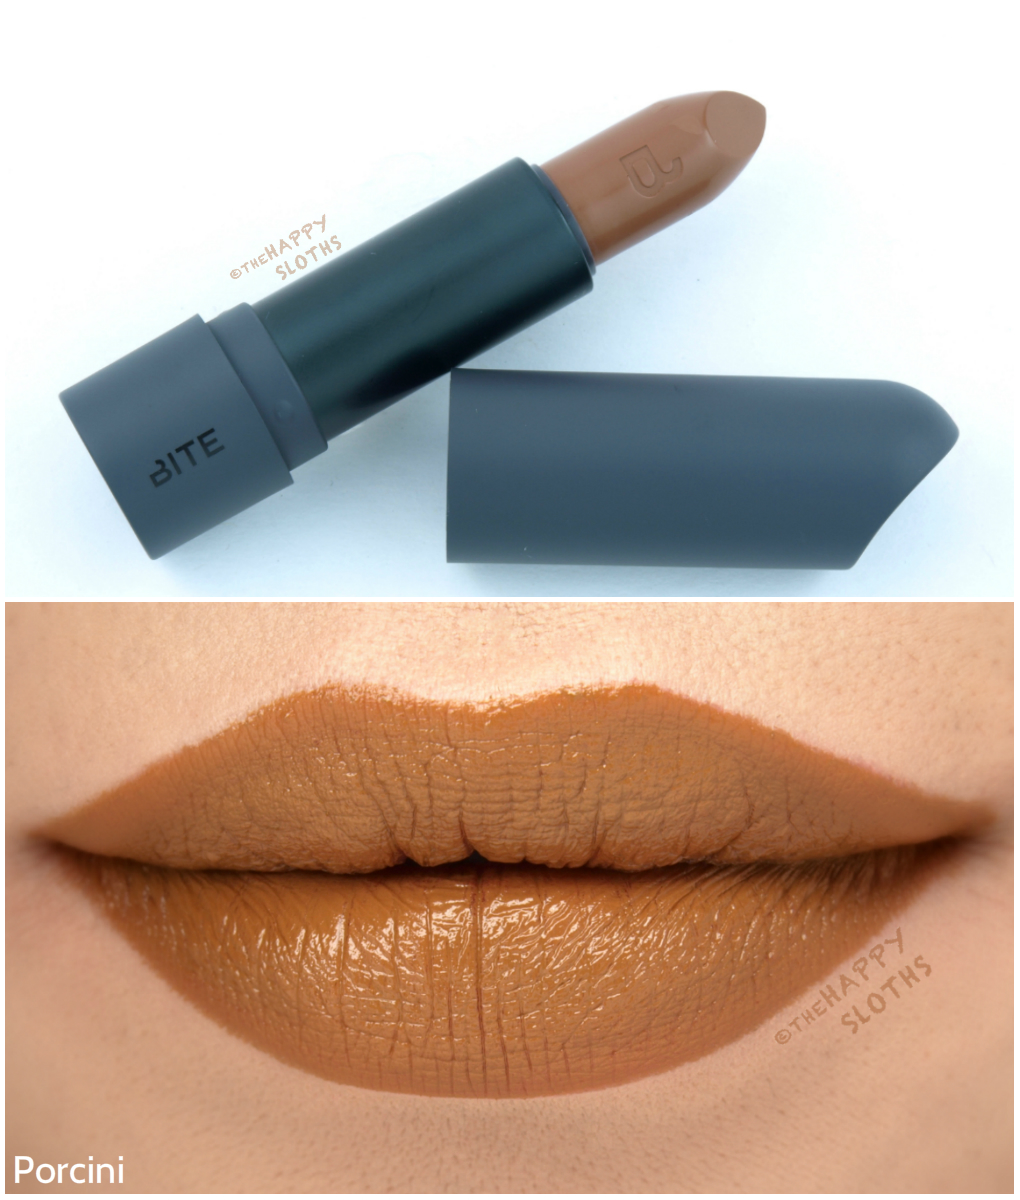 Bite Beauty Amuse Bouche Lipstick Porcini: Review and Swatches